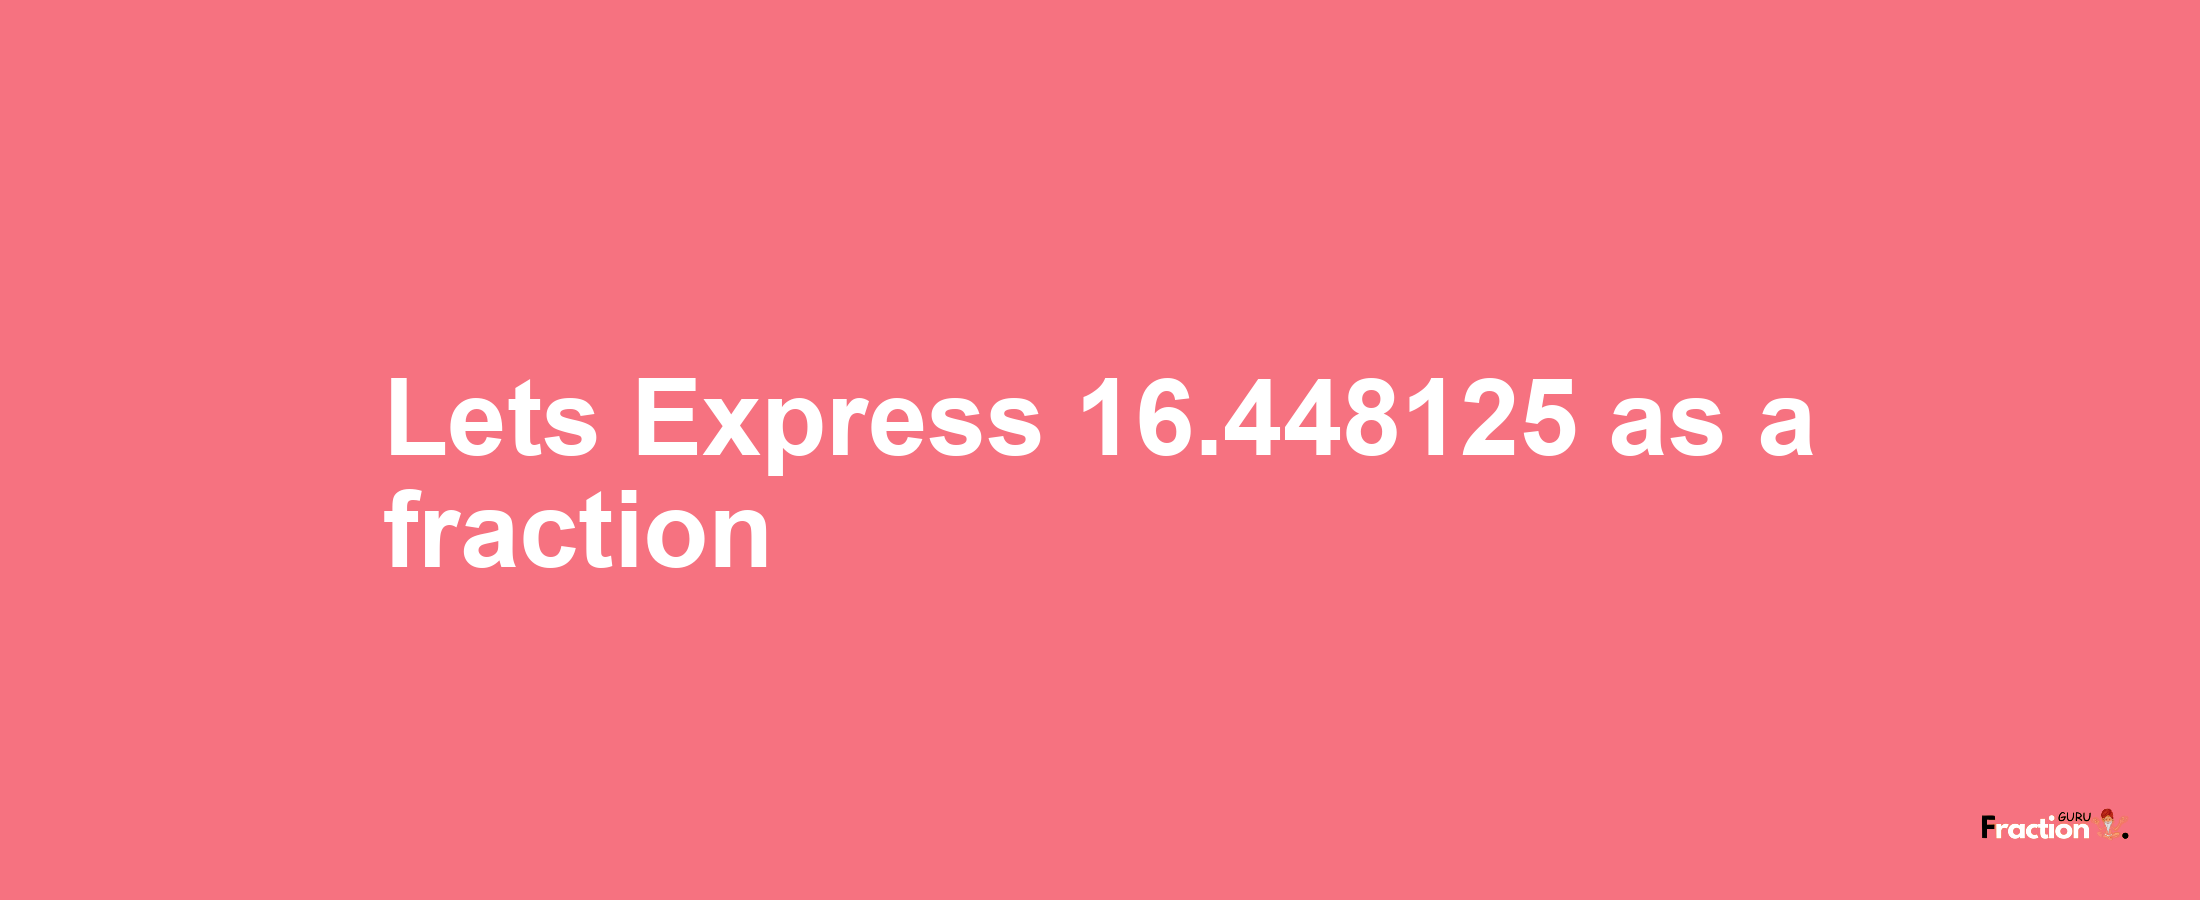 Lets Express 16.448125 as afraction